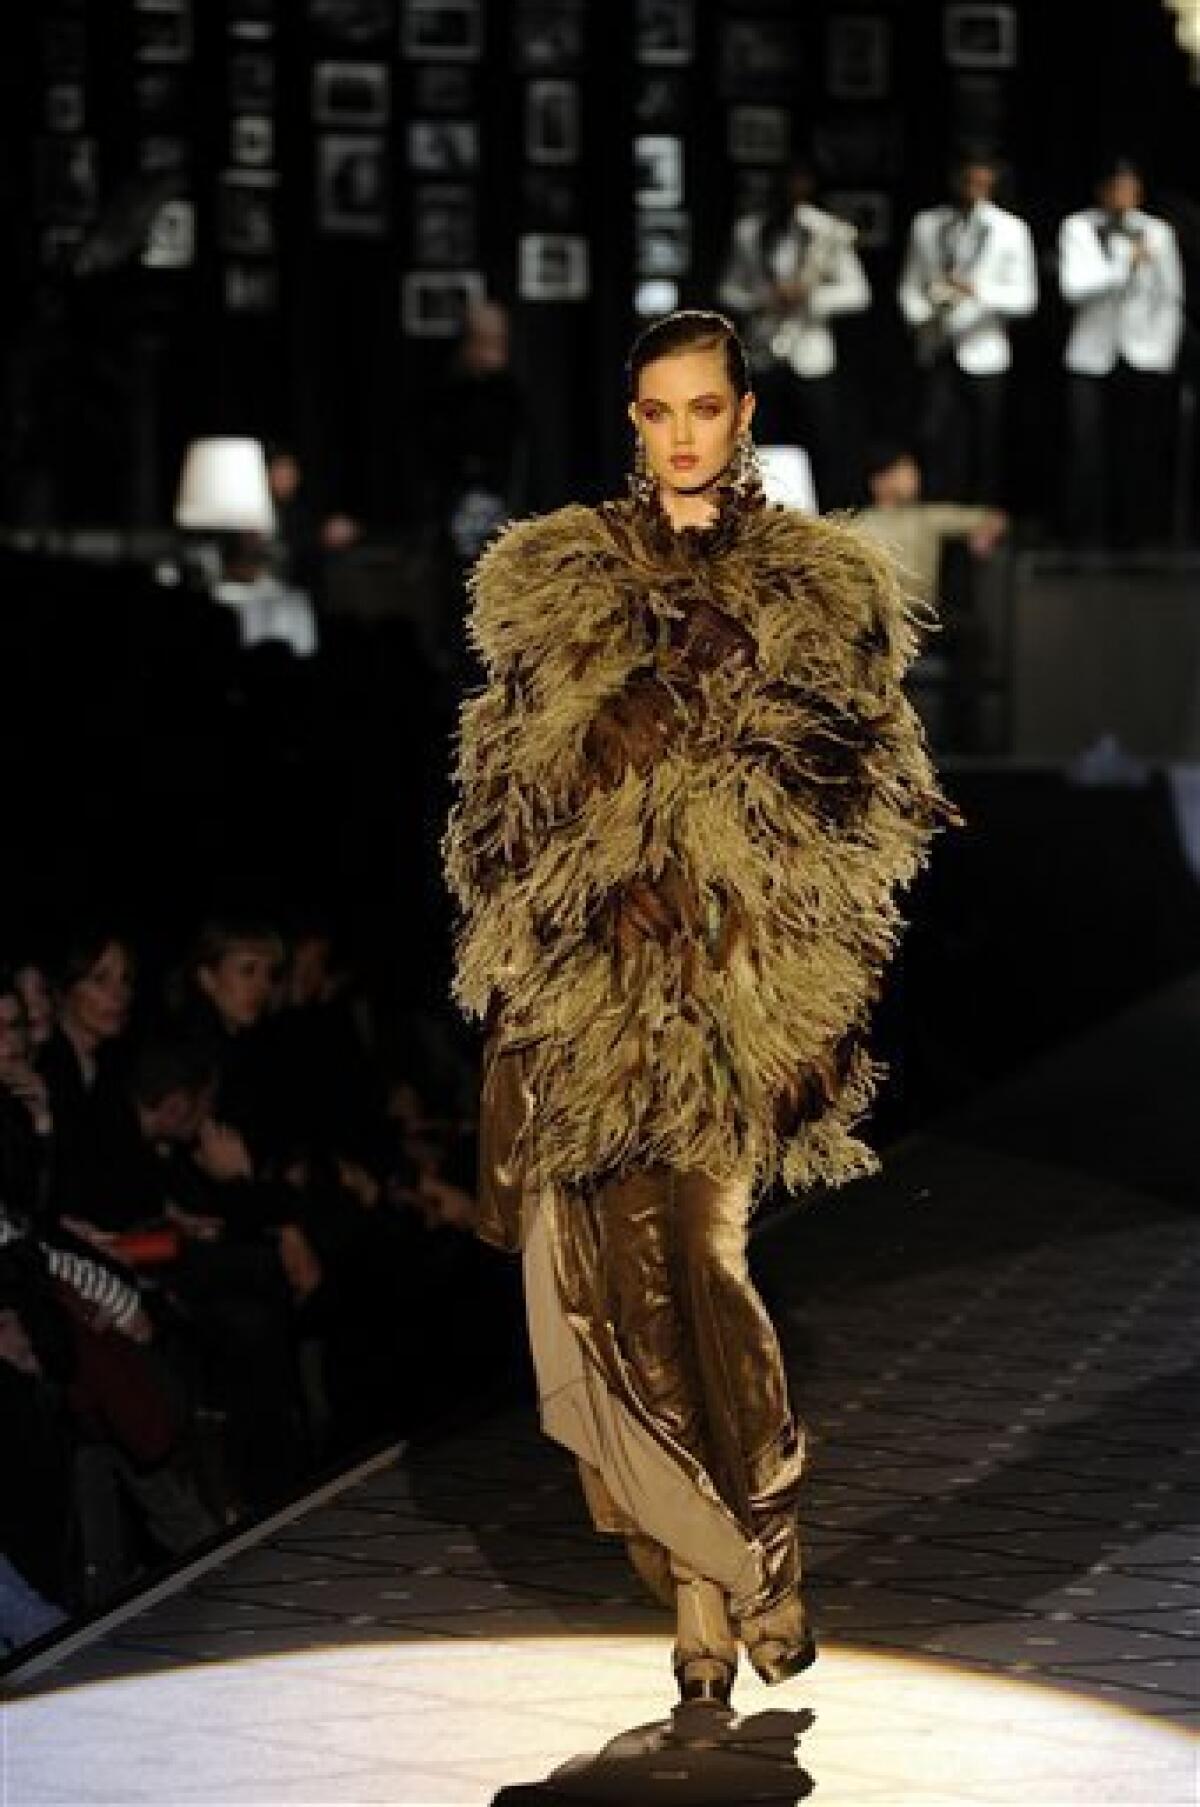 Large coats a mainstay for next winter from Milan - The San Diego